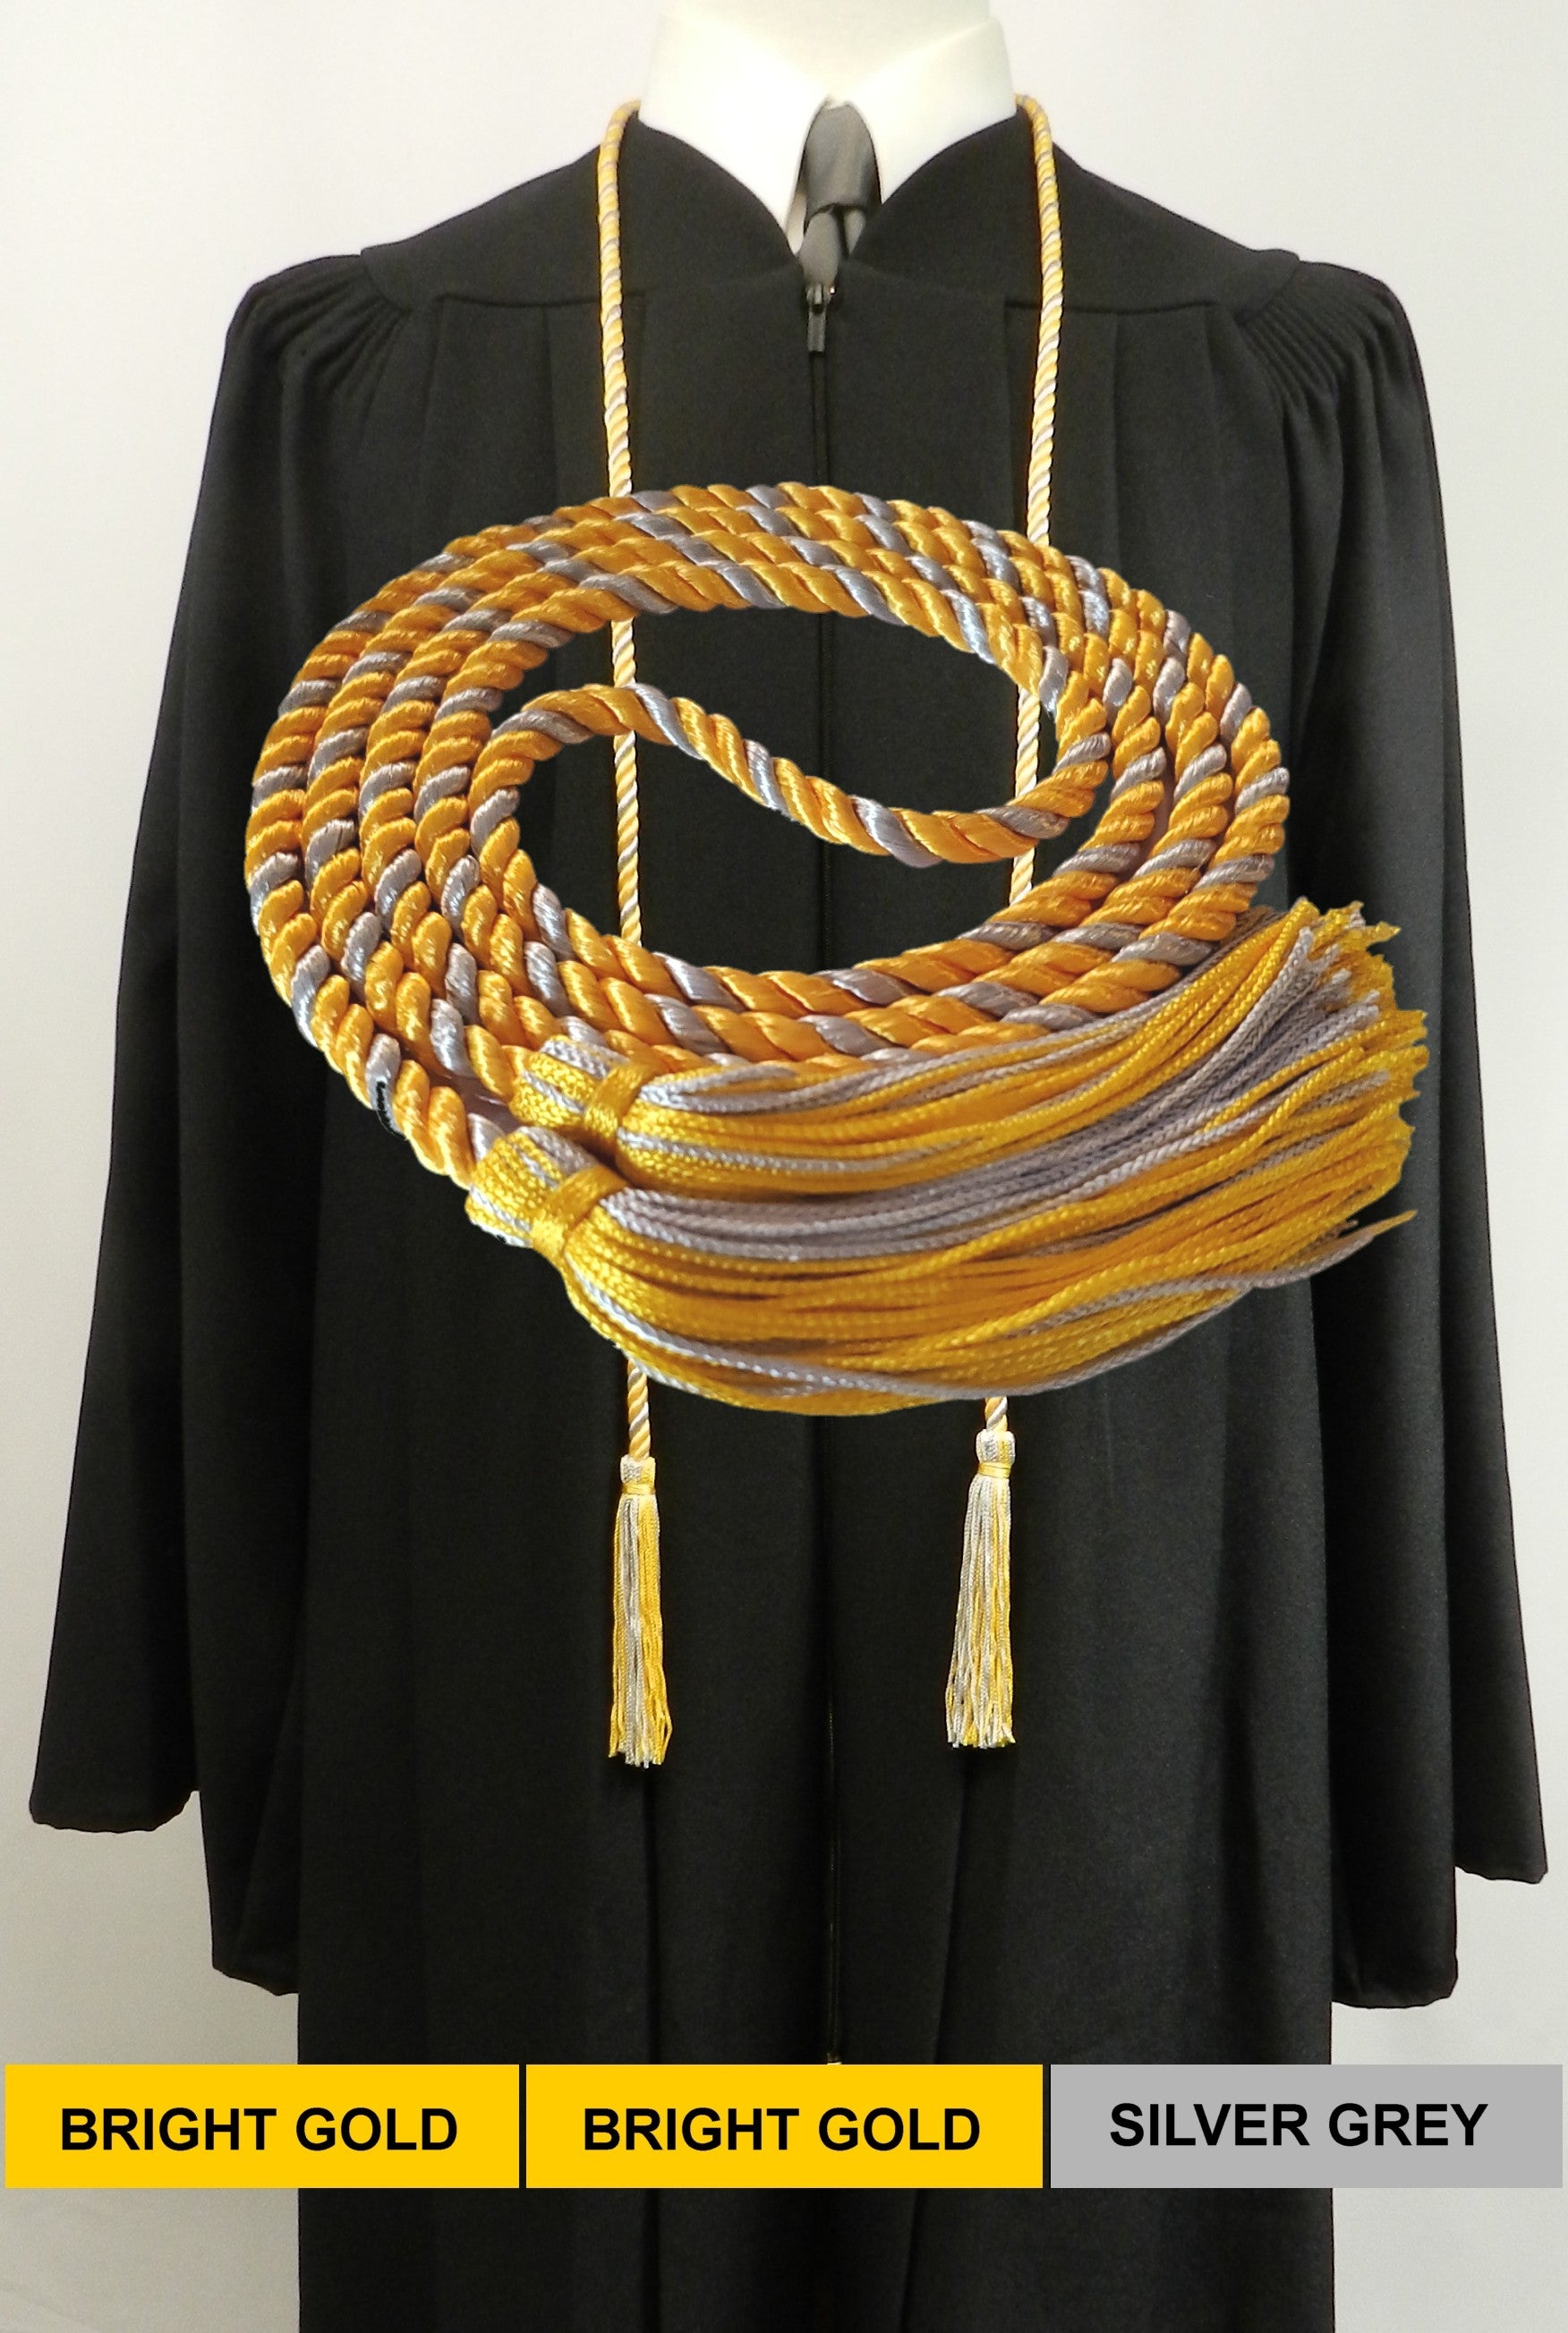 Honor Cords: Gold-Silver, Senior Class Graduation Products